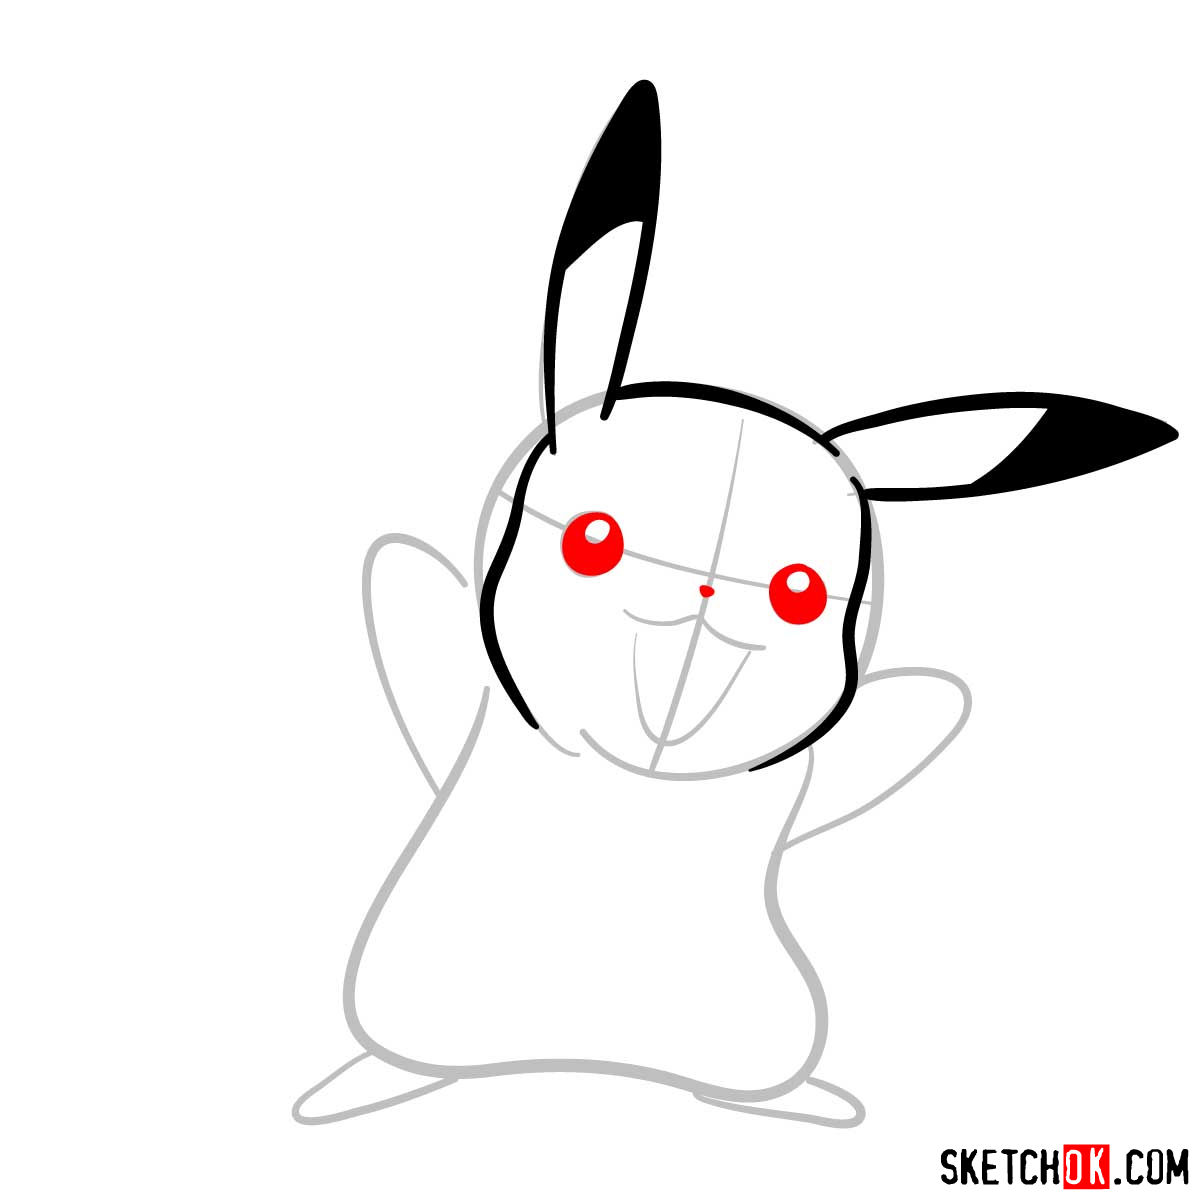 How to draw Pikachu Pokemon with arms wide open - step 04